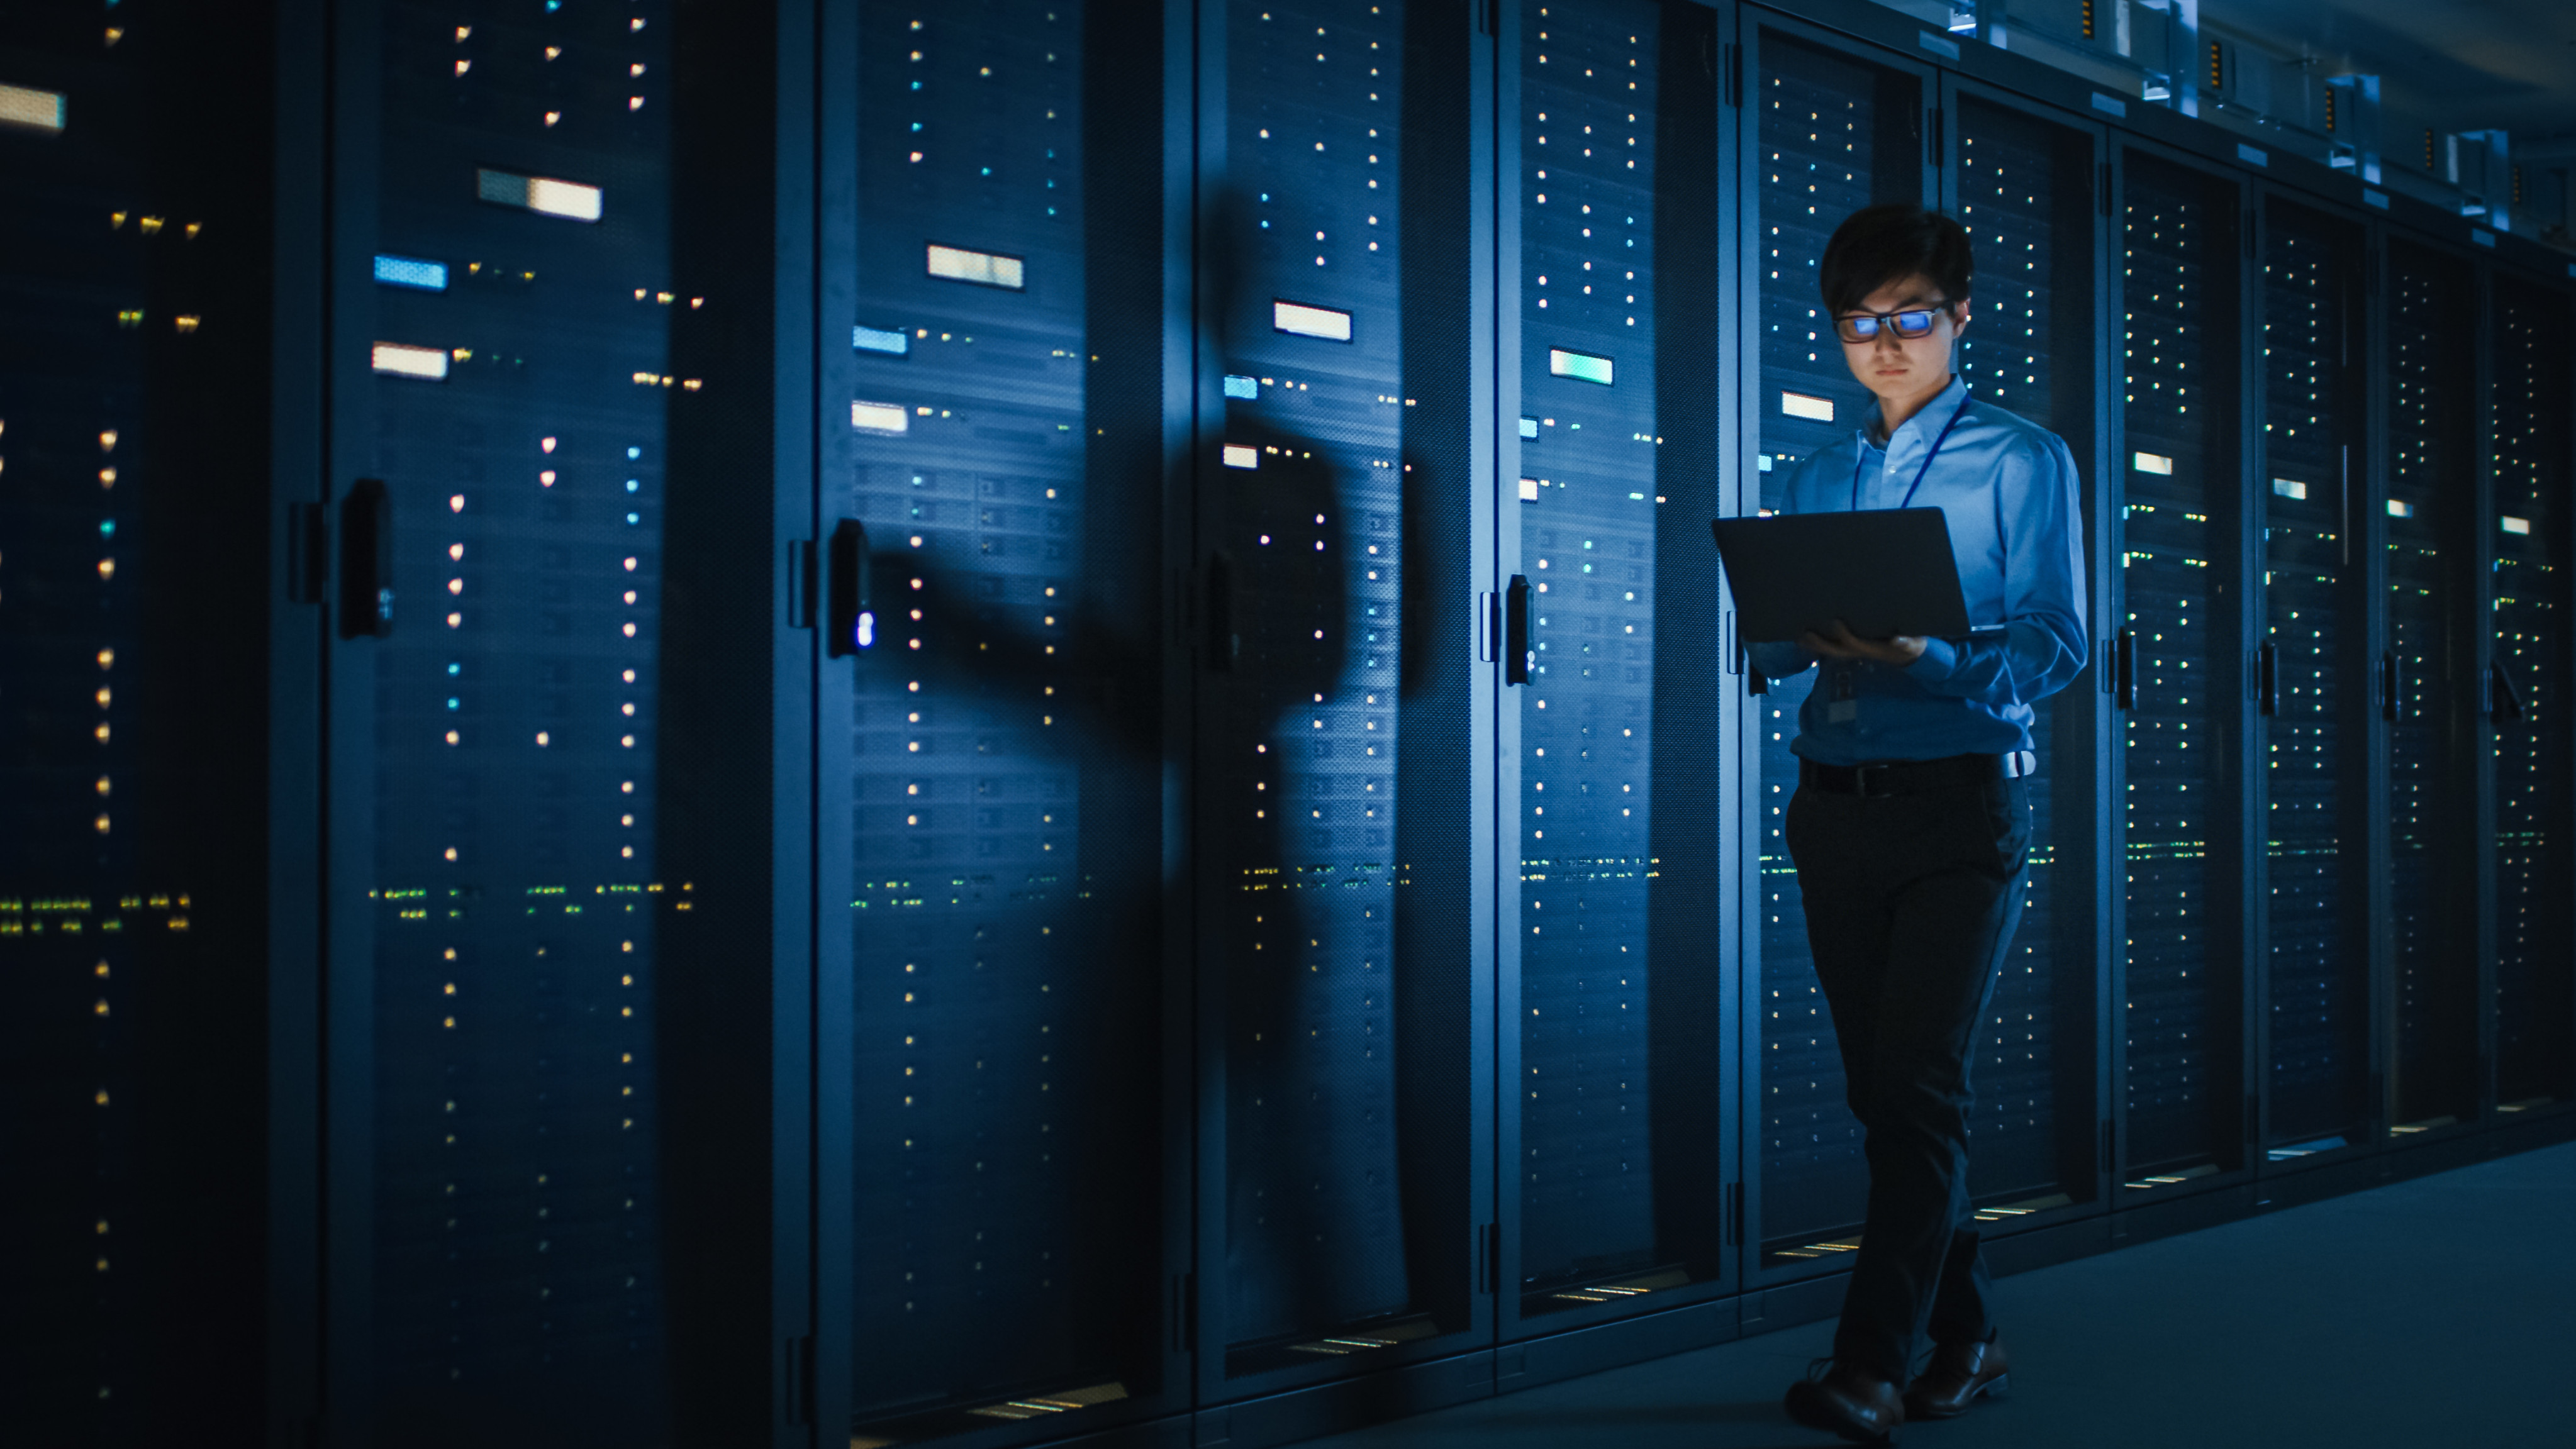 A technician inspects a row of server racks used for cloud computing. Photo: Shutterstock